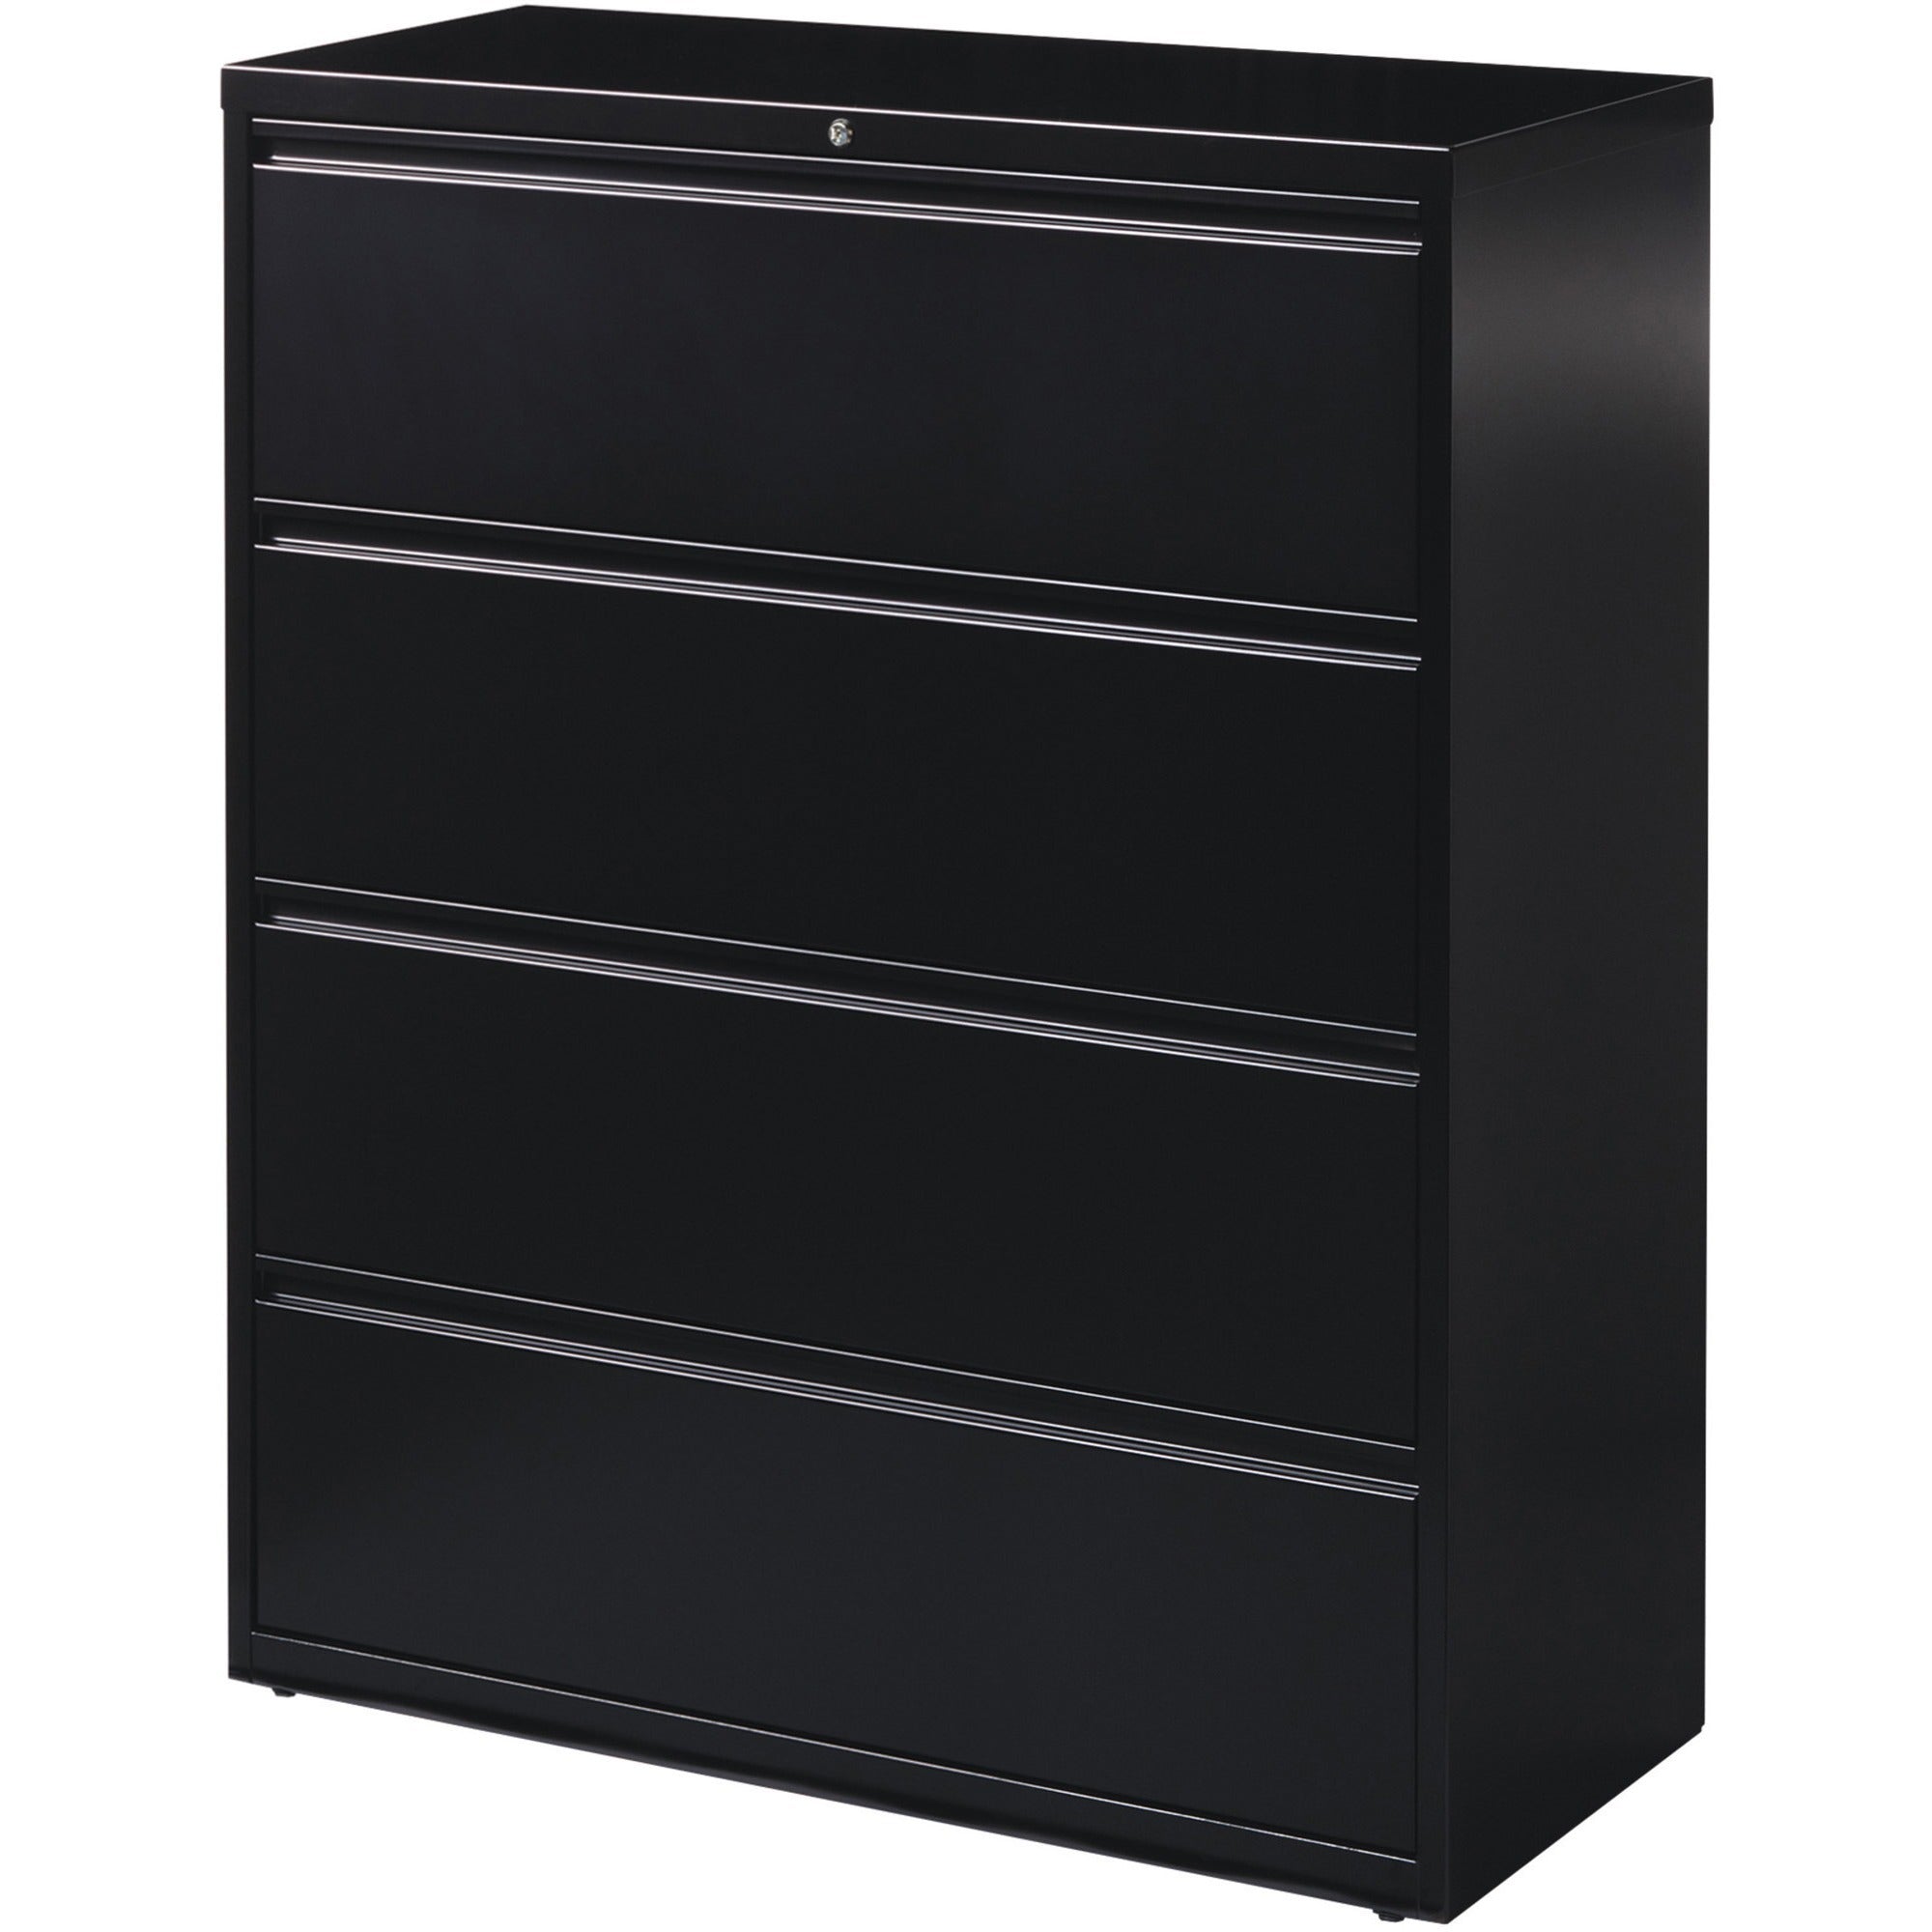 Lorell Fortress Series Lateral File - 42" x 18.6" x 52.5" - 4 x Drawer(s) for File - Letter, Legal, A4 - Lateral - Interlocking, Leveling Glide, Label Holder, Ball-bearing Suspension - Black - Recycled - 